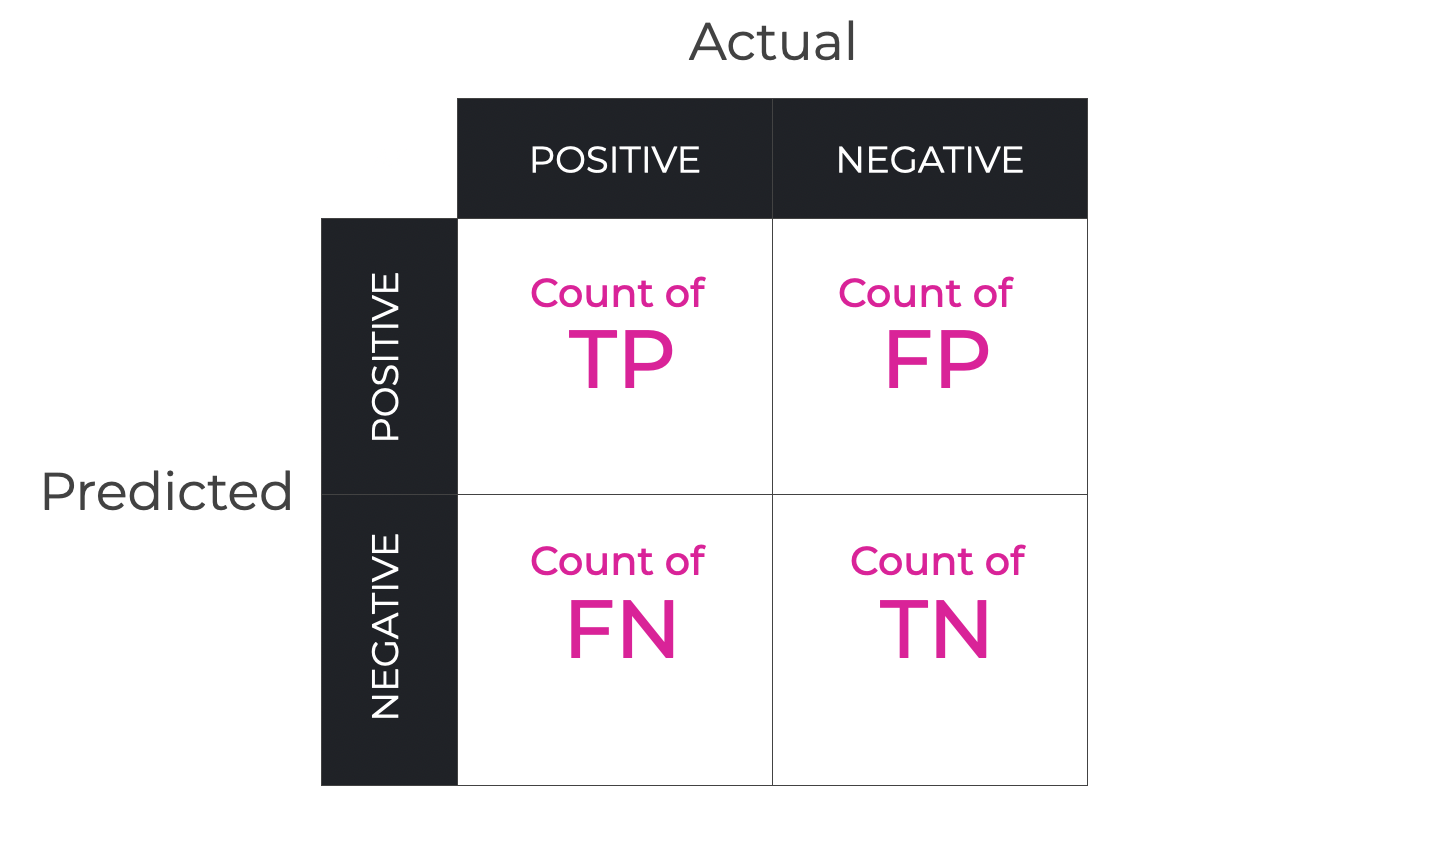 An image of a confusion matrix, which shows a 2x2 grid which counts the number of records that are TP, TN, FP, and FN, based on the whether the classifier made a correct or incorrect prediction.